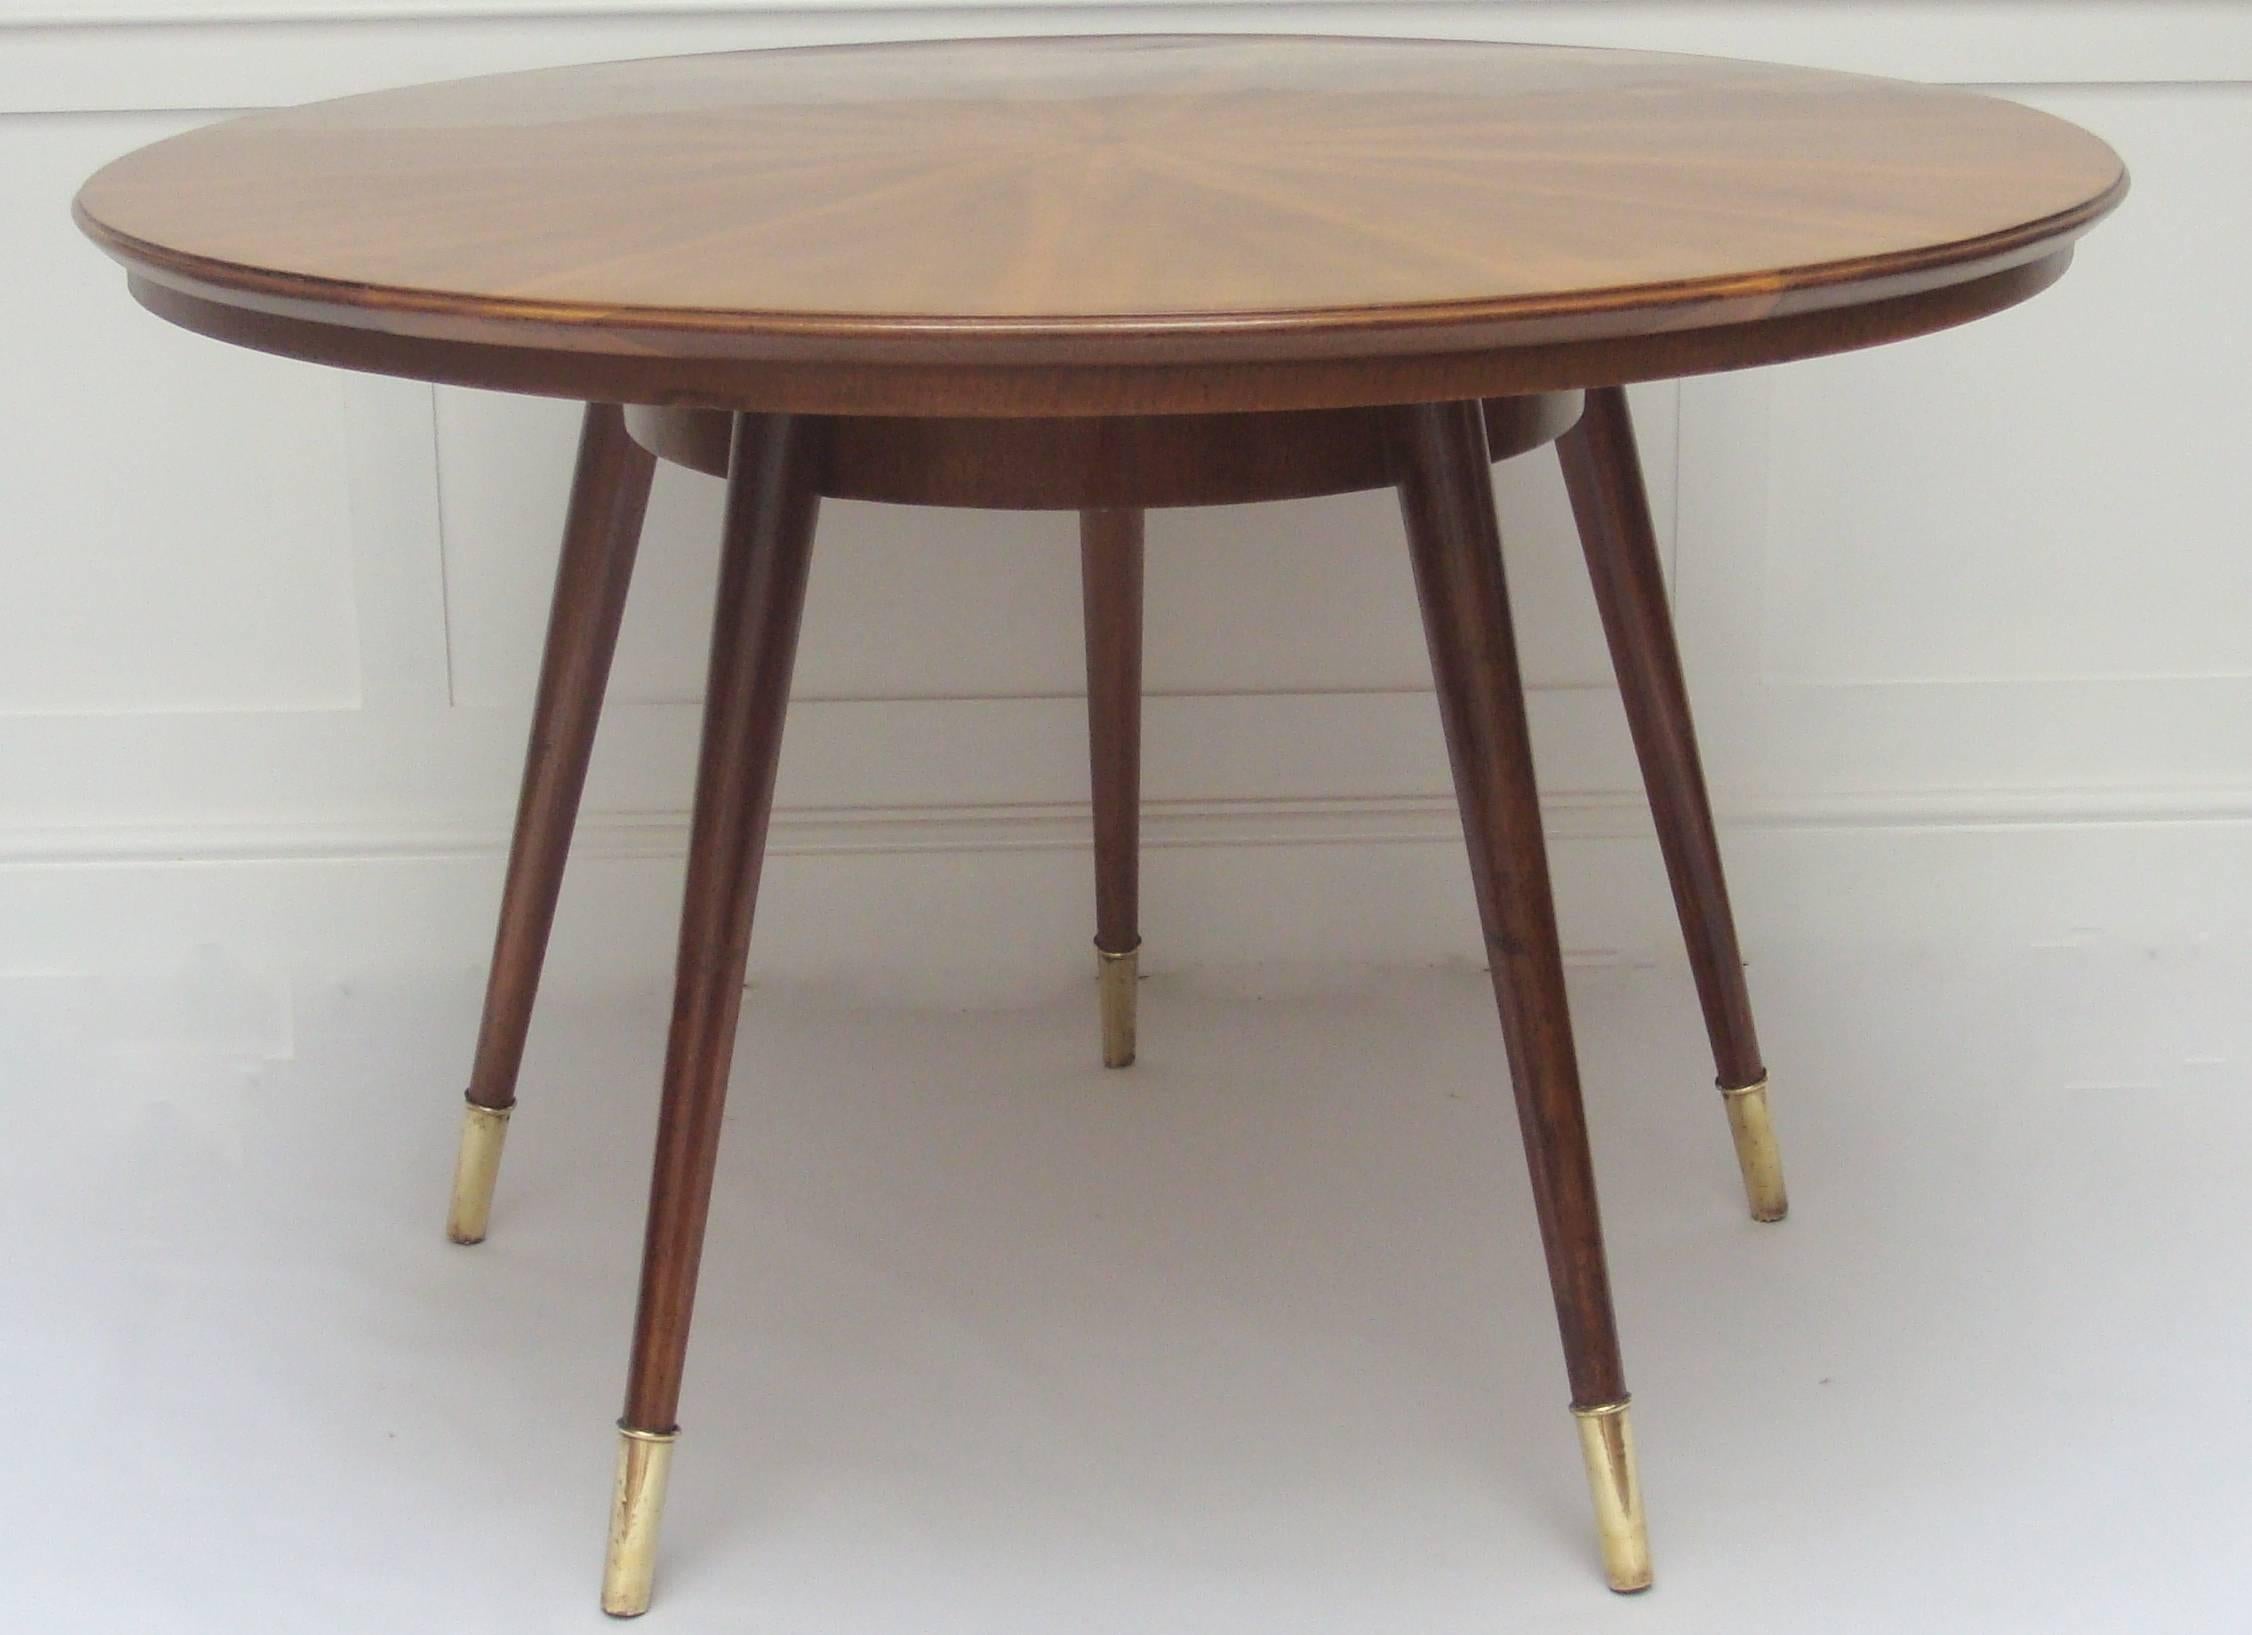 A circular starburst marquetry dining or centre table with five brass tipped legs attributed to Carlo De Carli.

Provenance: Private collection, Rome.
    